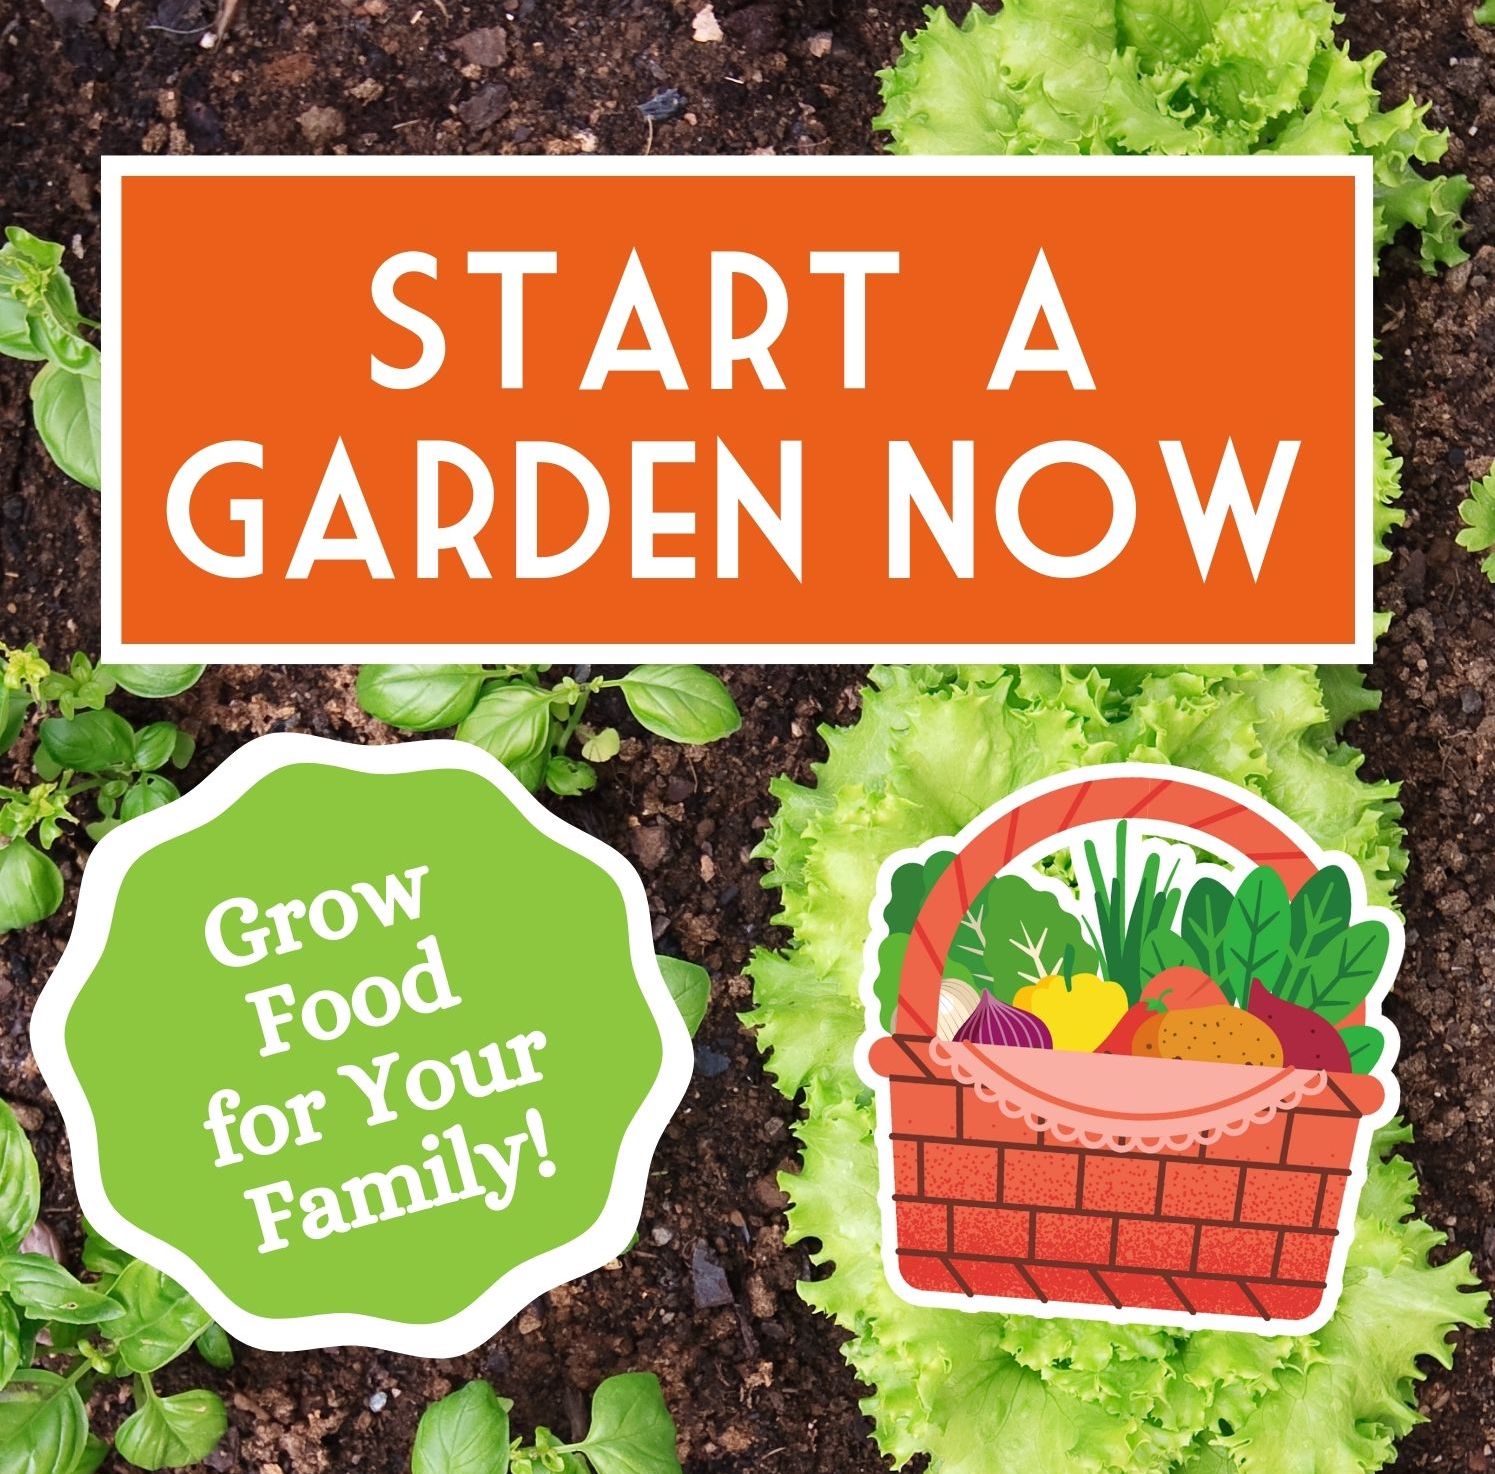 DON’T WAIT! It’s time to start your garden NOW! Lower your grocery bill by growing your own food!